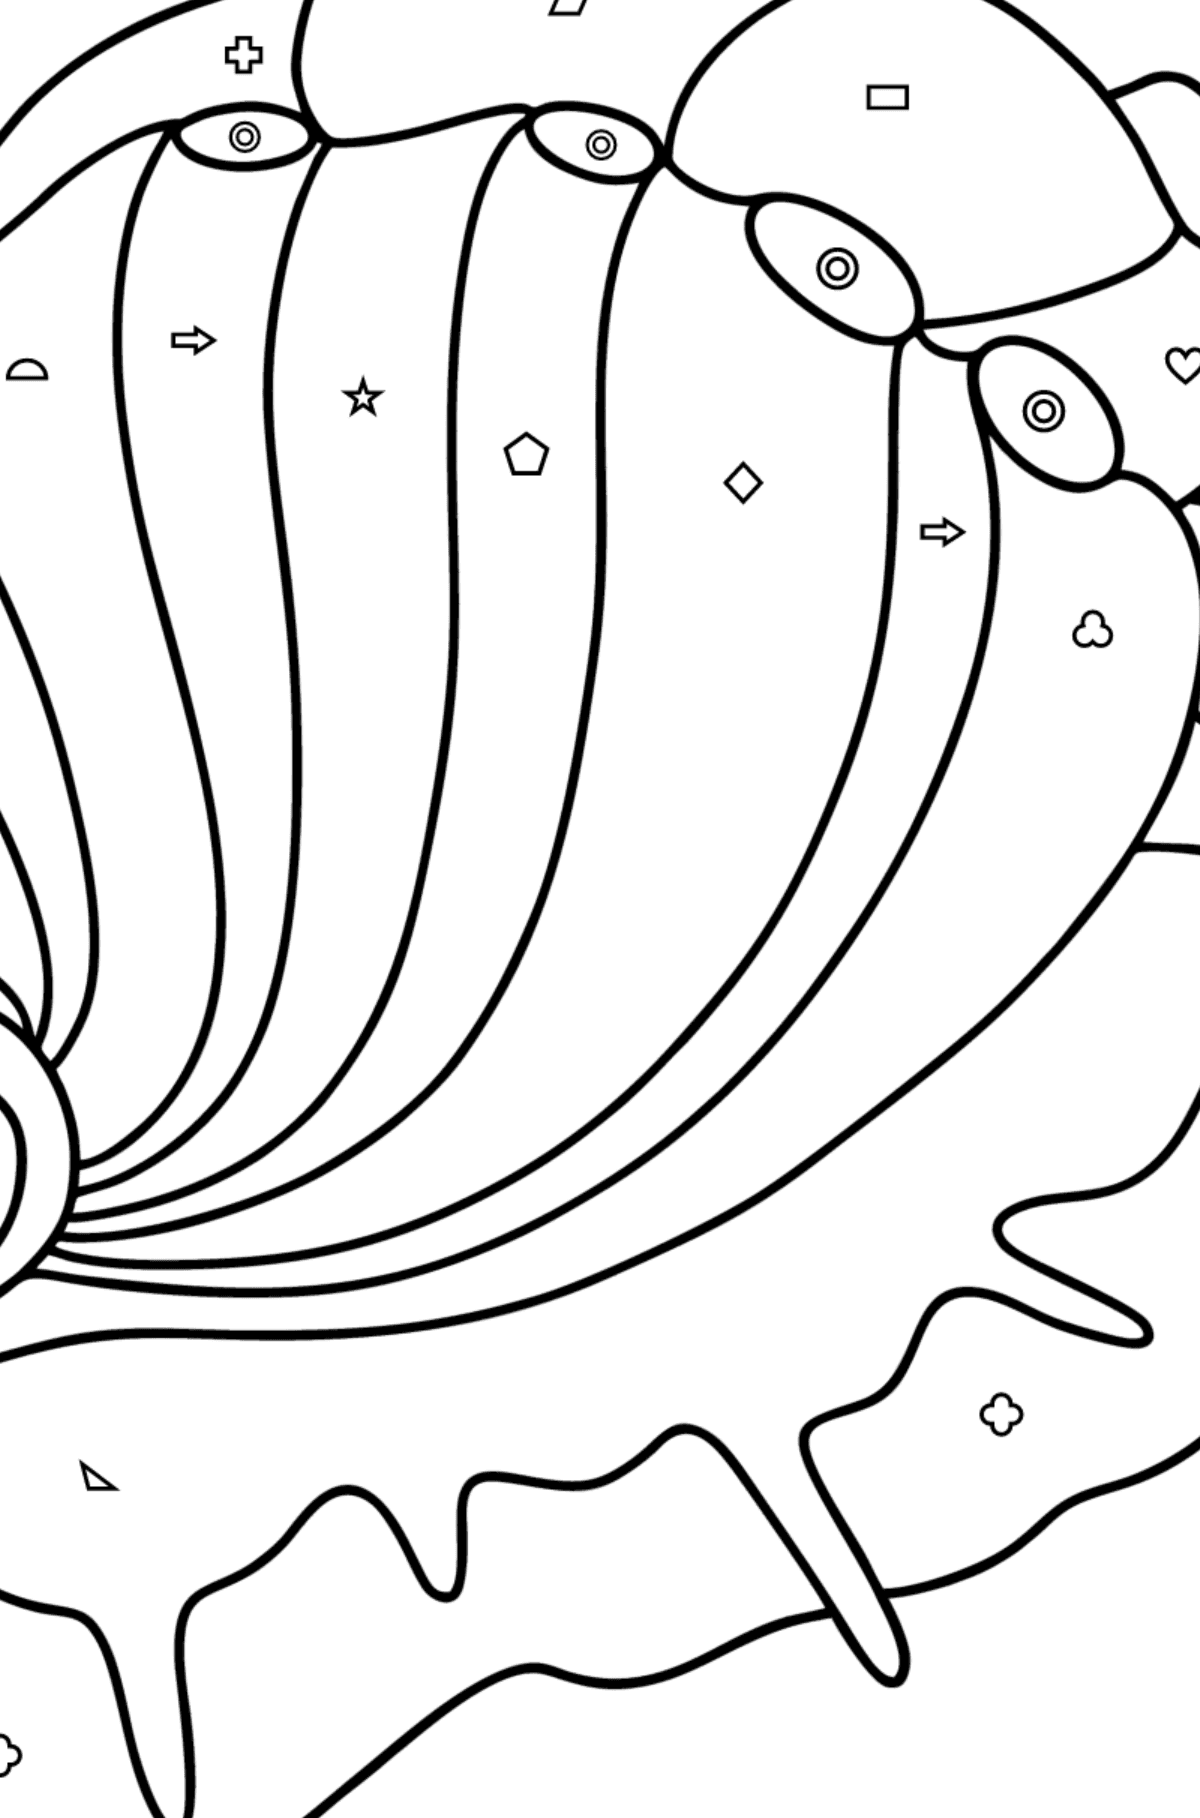 Mollusk abalone coloring page - Coloring by Geometric Shapes for Kids